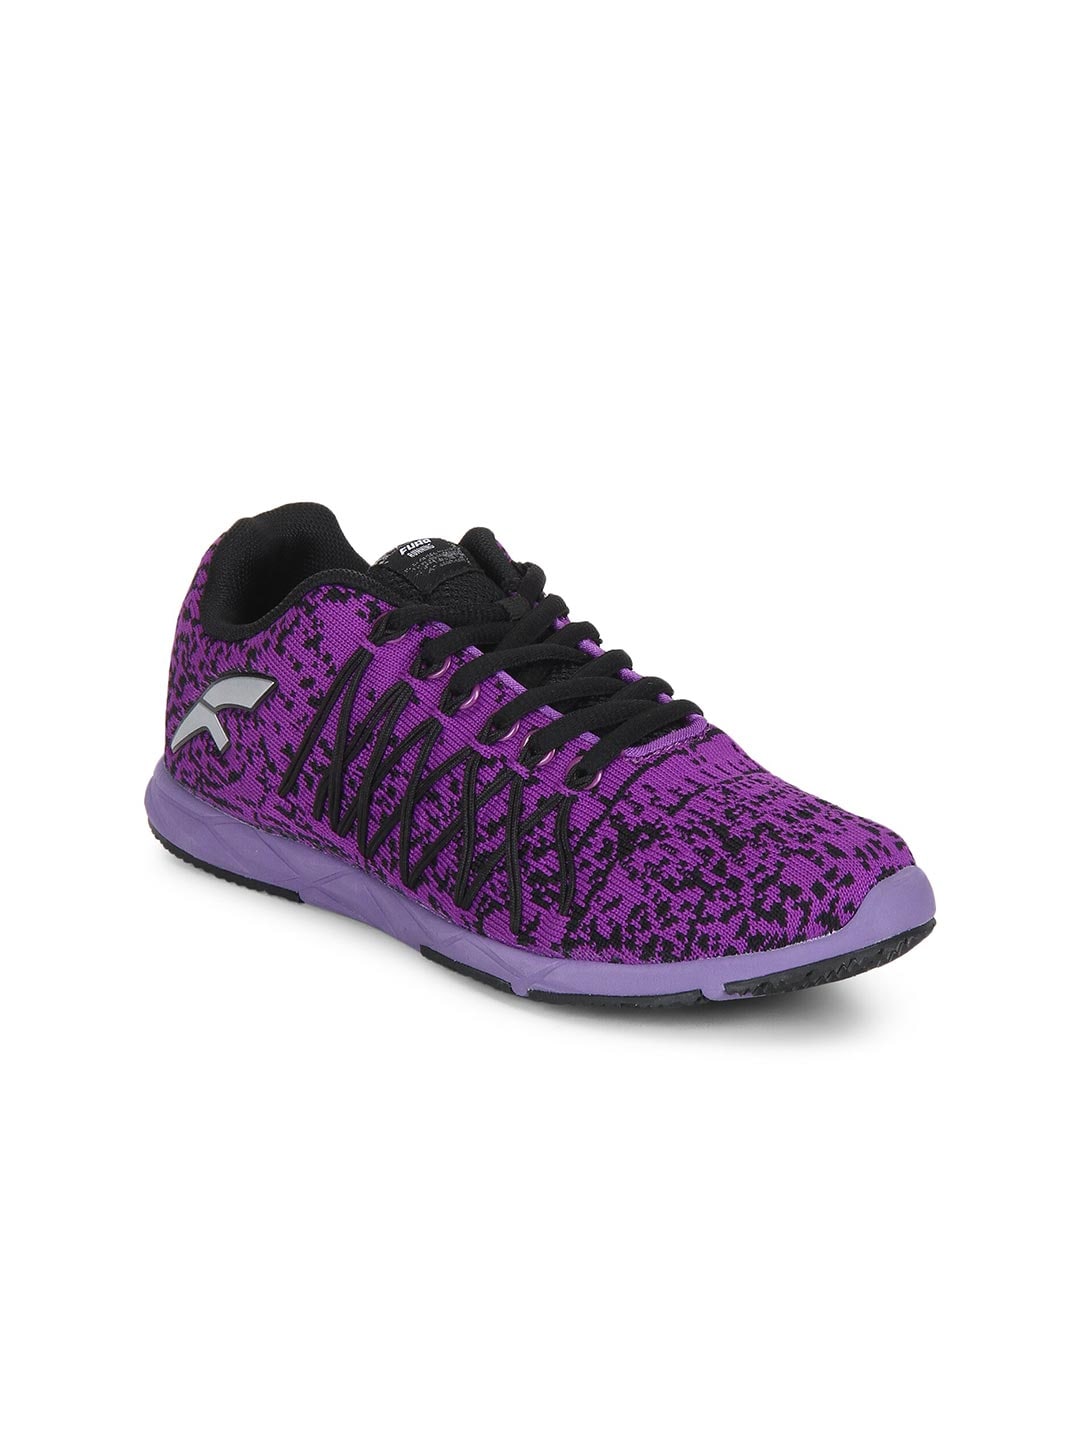 FURO by Red Chief Women Black Mesh Running Shoes Price in India